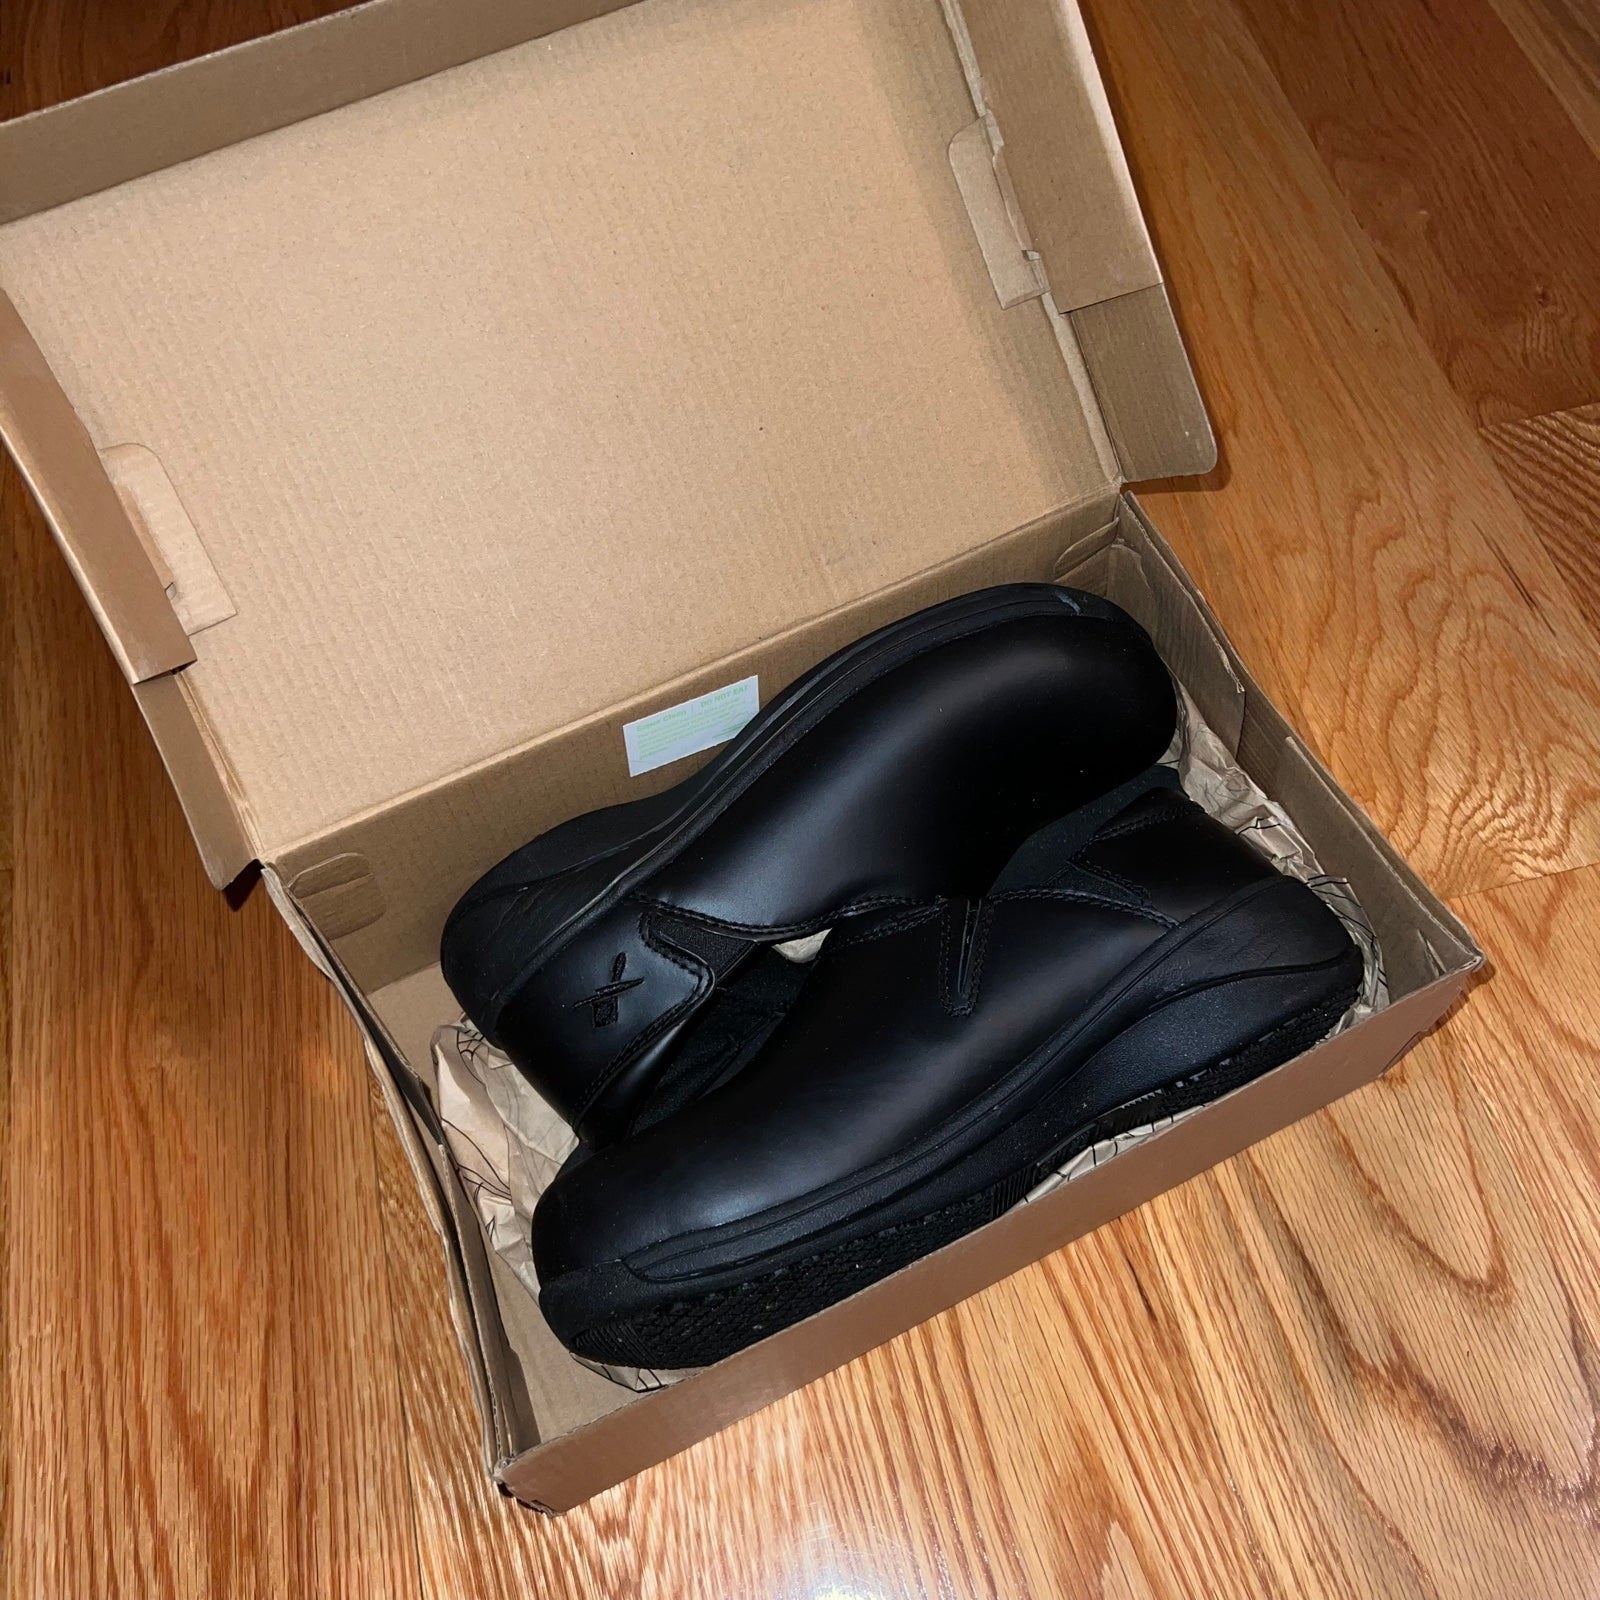 NWT Mozo Black Forza AT women’s 9 stainless steel toe s